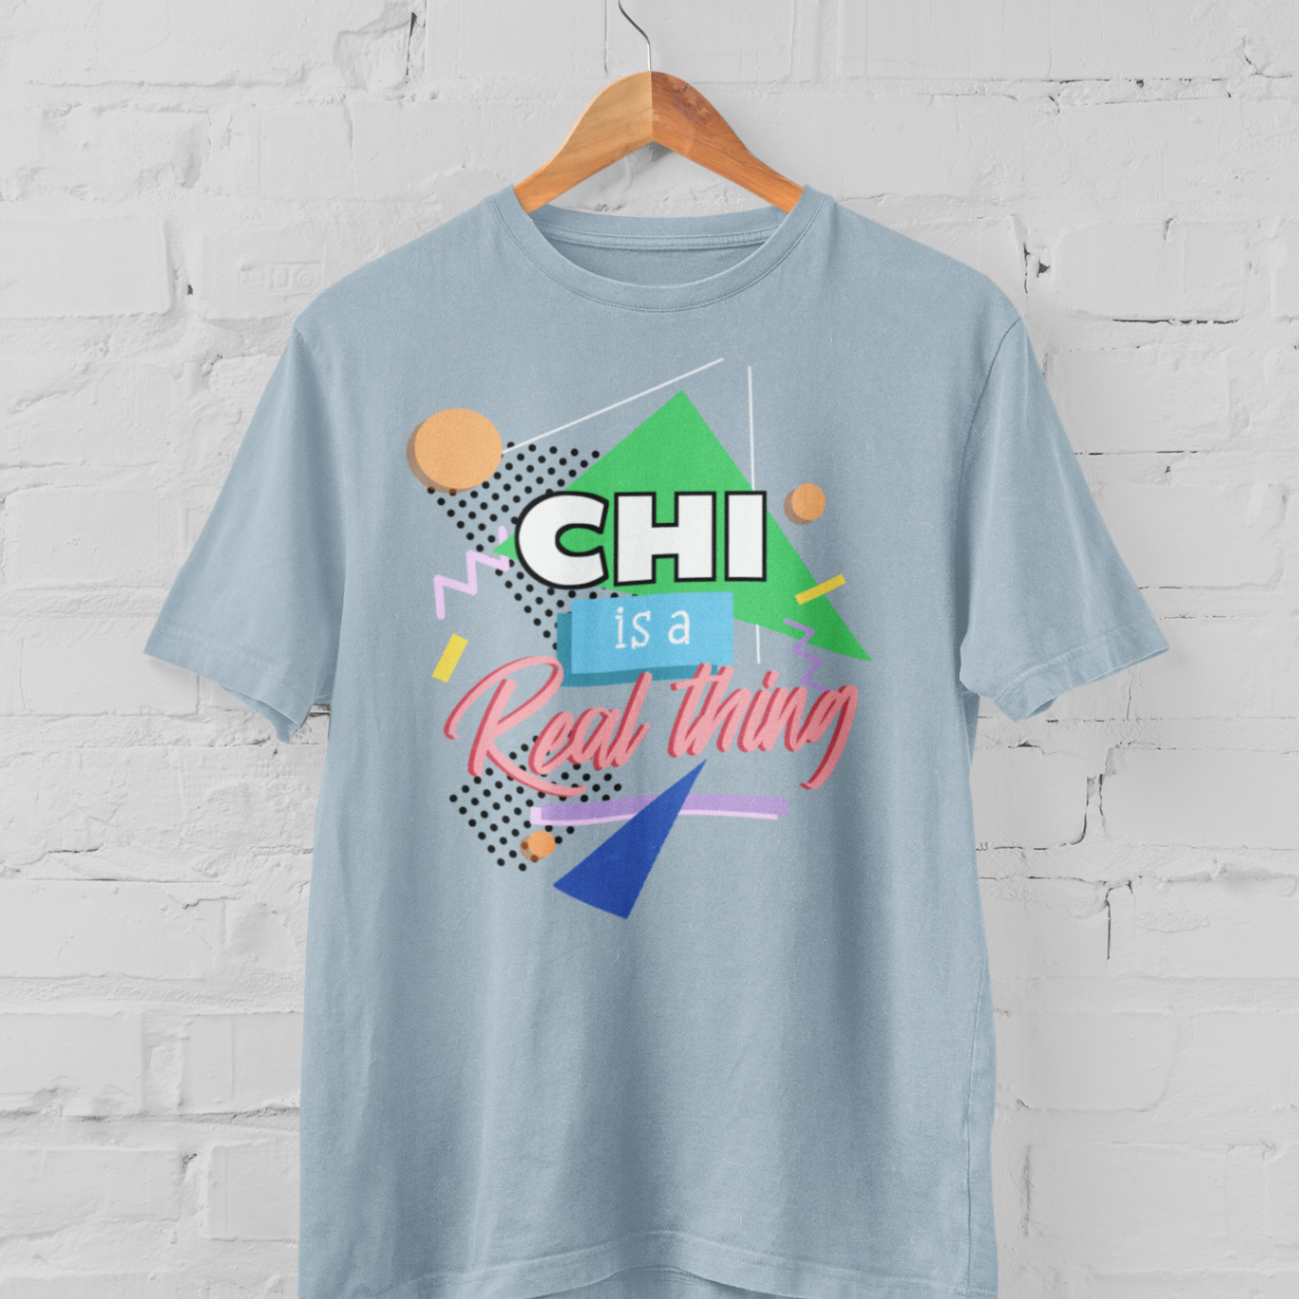  light blue t-shirt 'Chi is a real thing' design